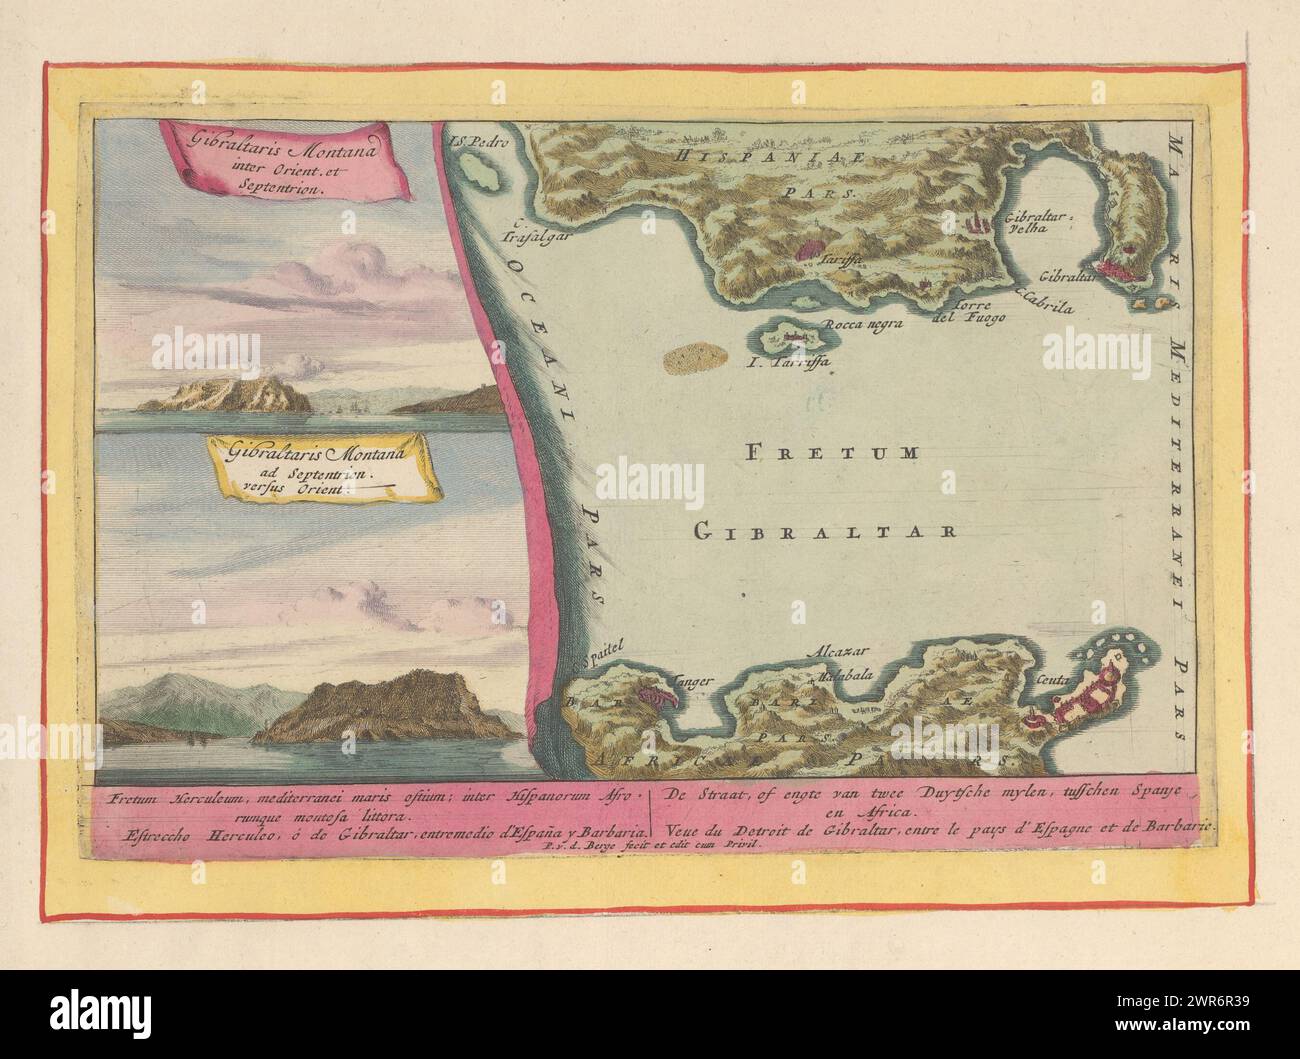 View of the Rock of Gibraltar and a map of the Strait of Gibraltar, The Strait, or Strait of Two Duytsche Miles, between Spain and Africa (...) (title on object), Theatrum Hispaniae (...) (series title ), On the left a view of the Rock of Gibraltar and on the right a map of the Strait of Gibraltar. Below the performance a title in Latin, Spanish, Dutch and French. Print is part of an album., print maker: Pieter van den Berge, publisher: Pieter van den Berge, Staten van Holland en West-Friesland, print maker: Amsterdam, publisher: Amsterdam, The Hague, 1694 - 1737, paper, etching Stock Photo